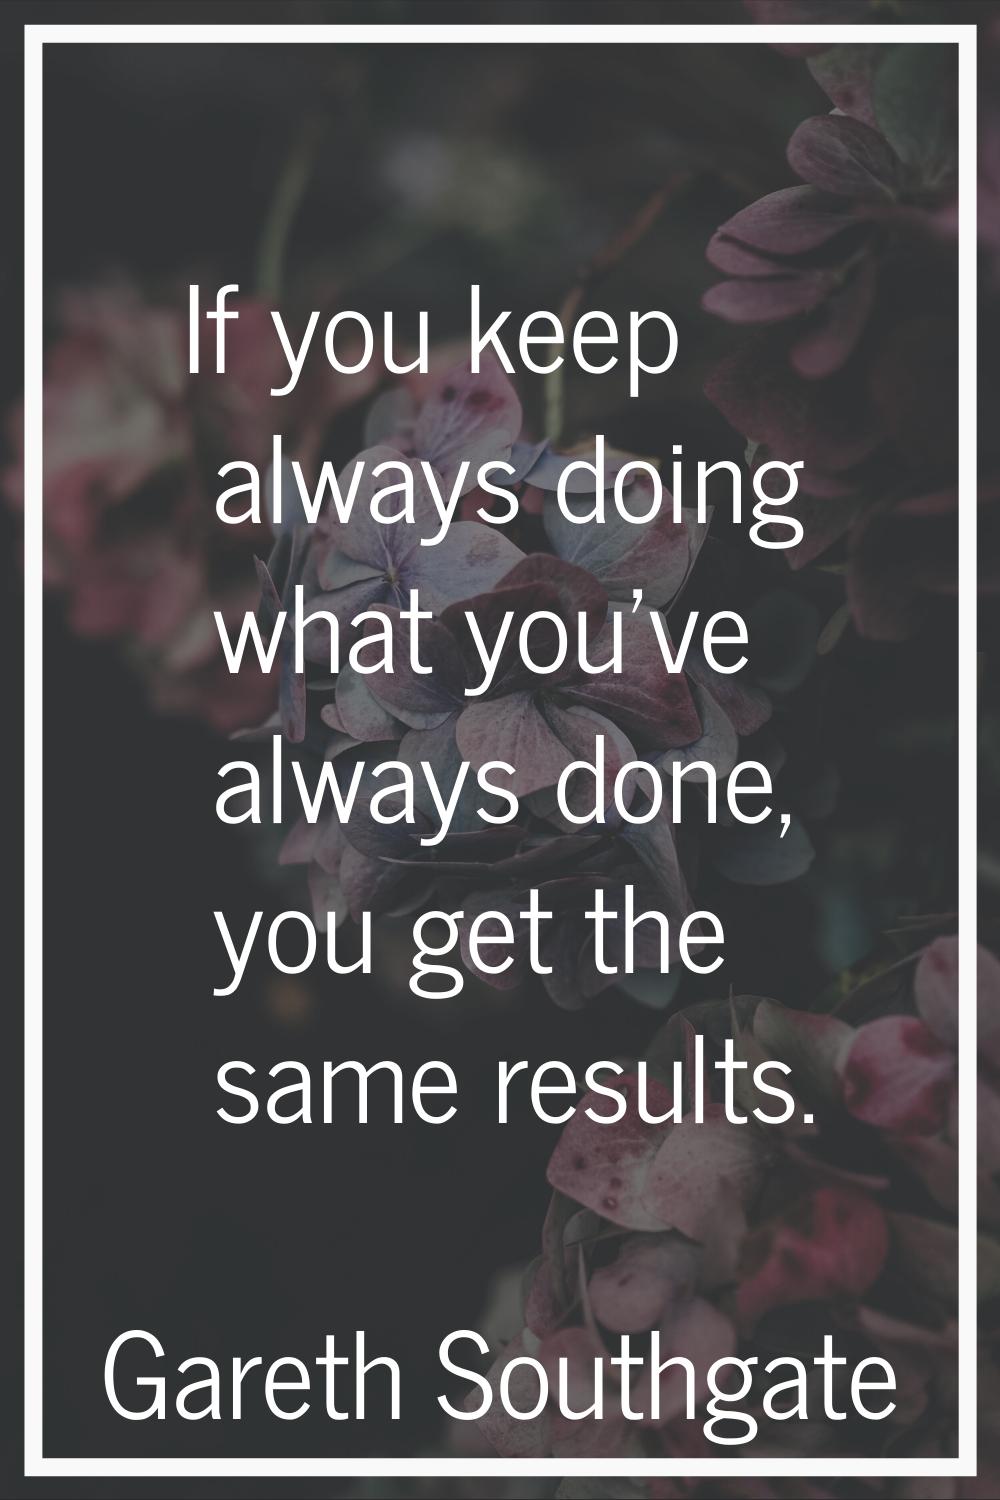 If you keep always doing what you've always done, you get the same results.